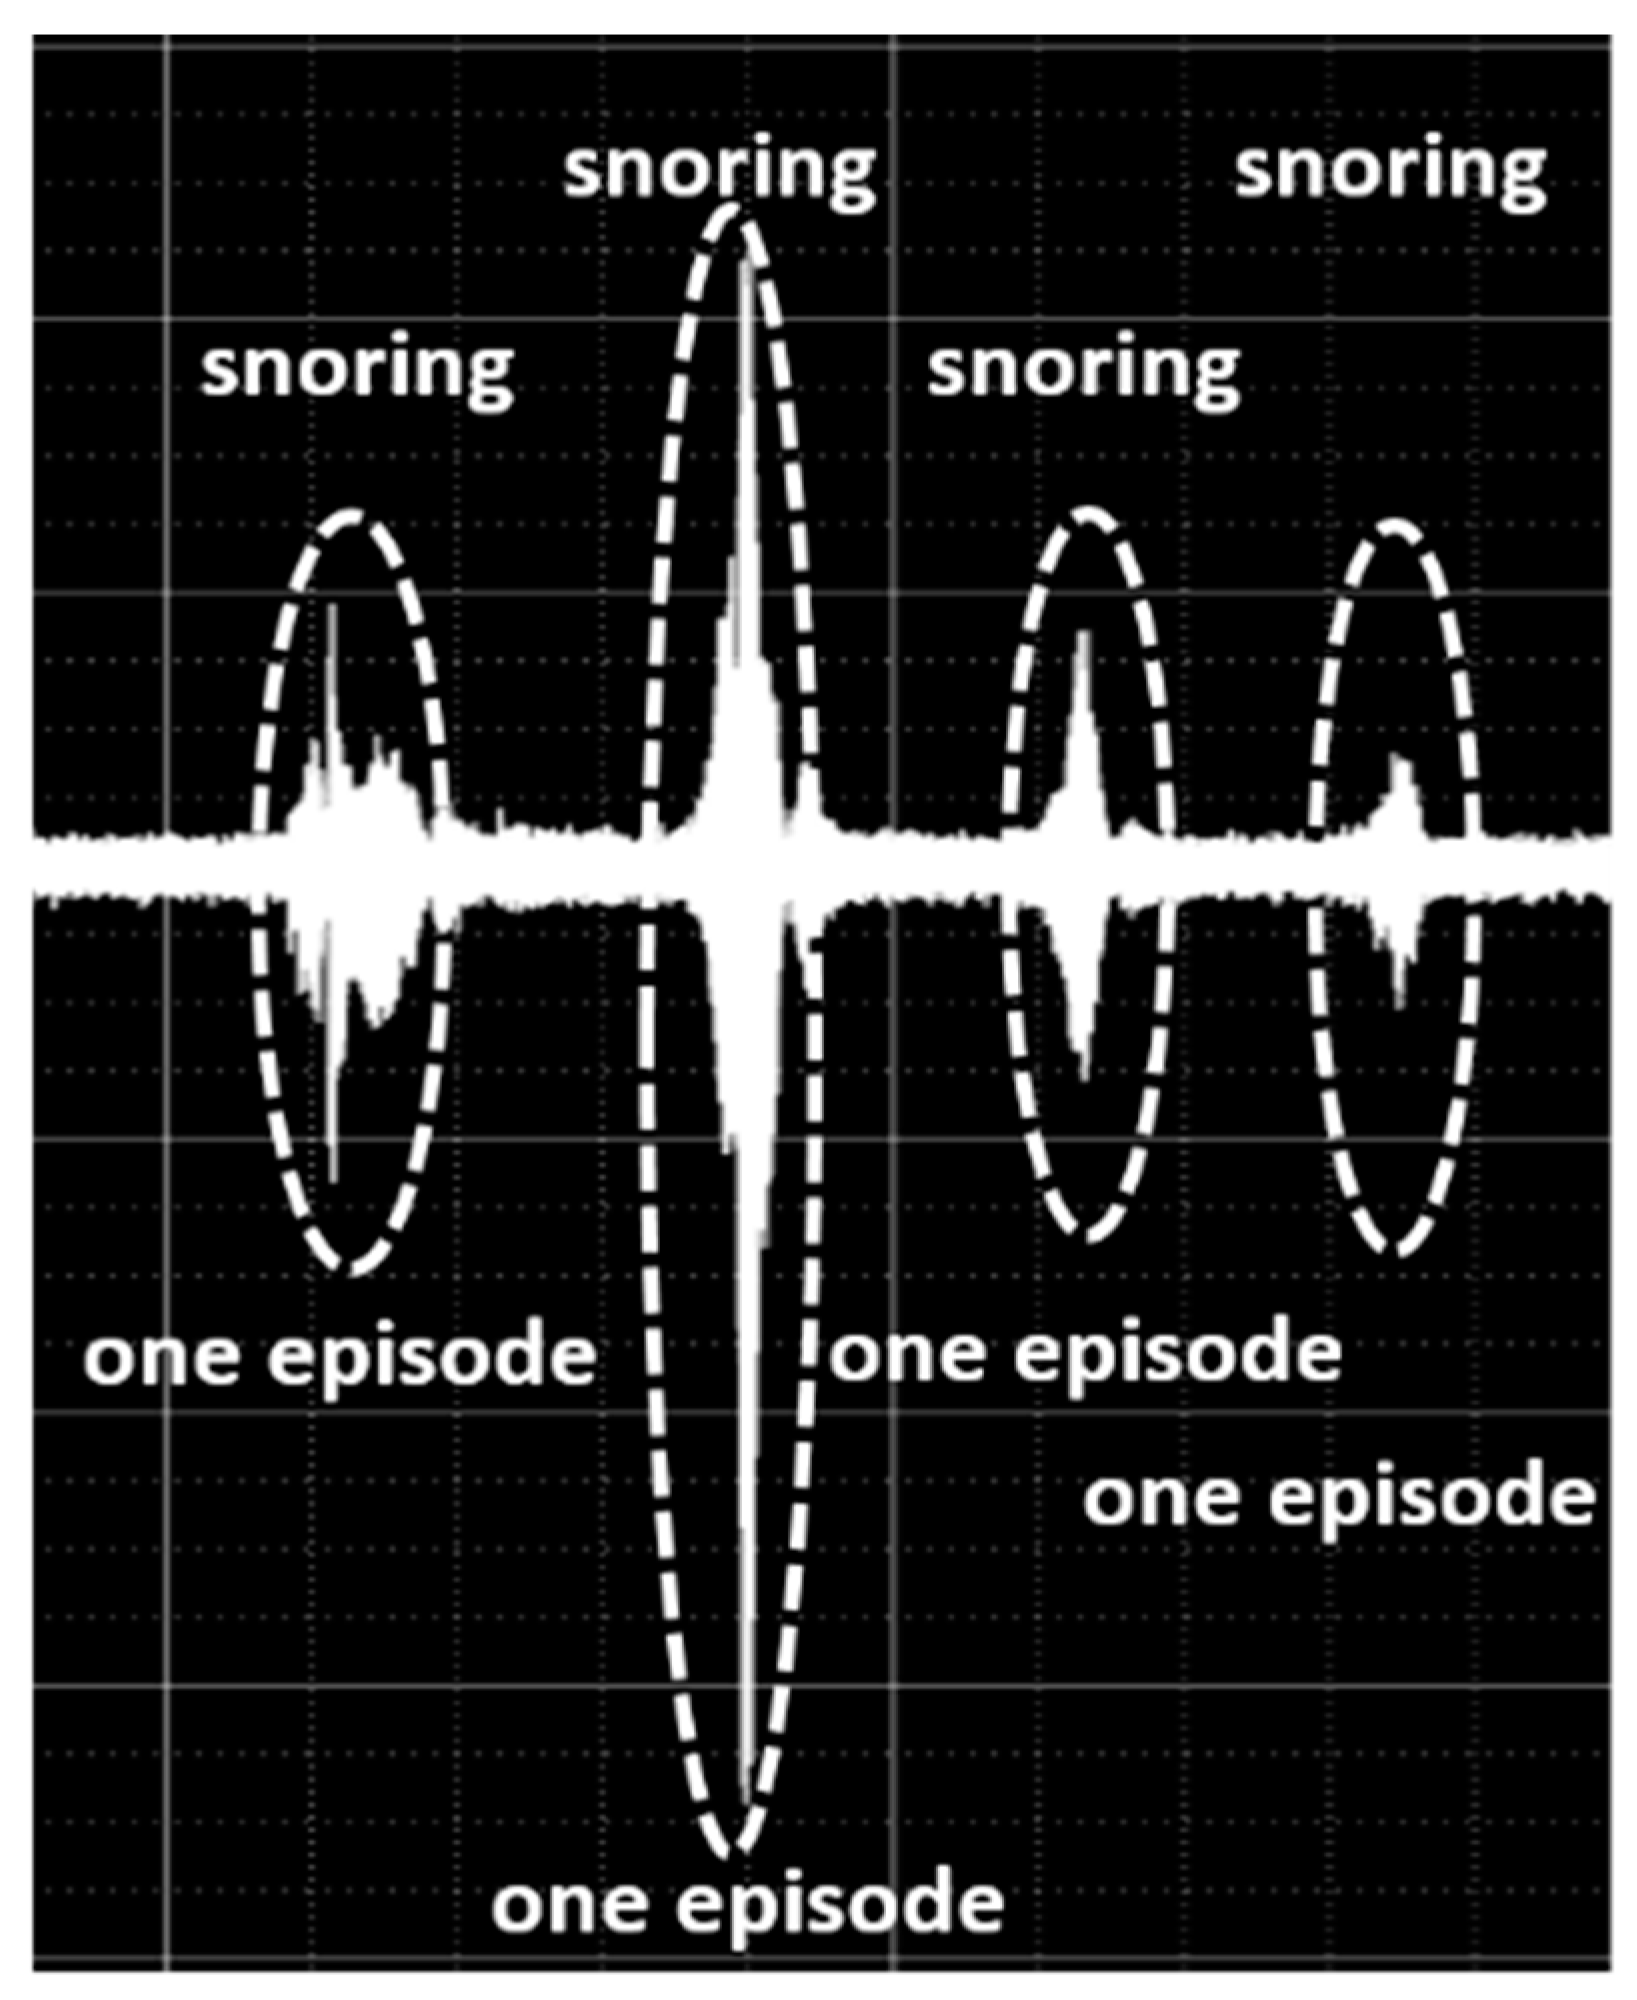 IJERPH | Free Full-Text | A New Feature with the Potential to Detect the  Severity of Obstructive Sleep Apnoea via Snoring Sound Analysis